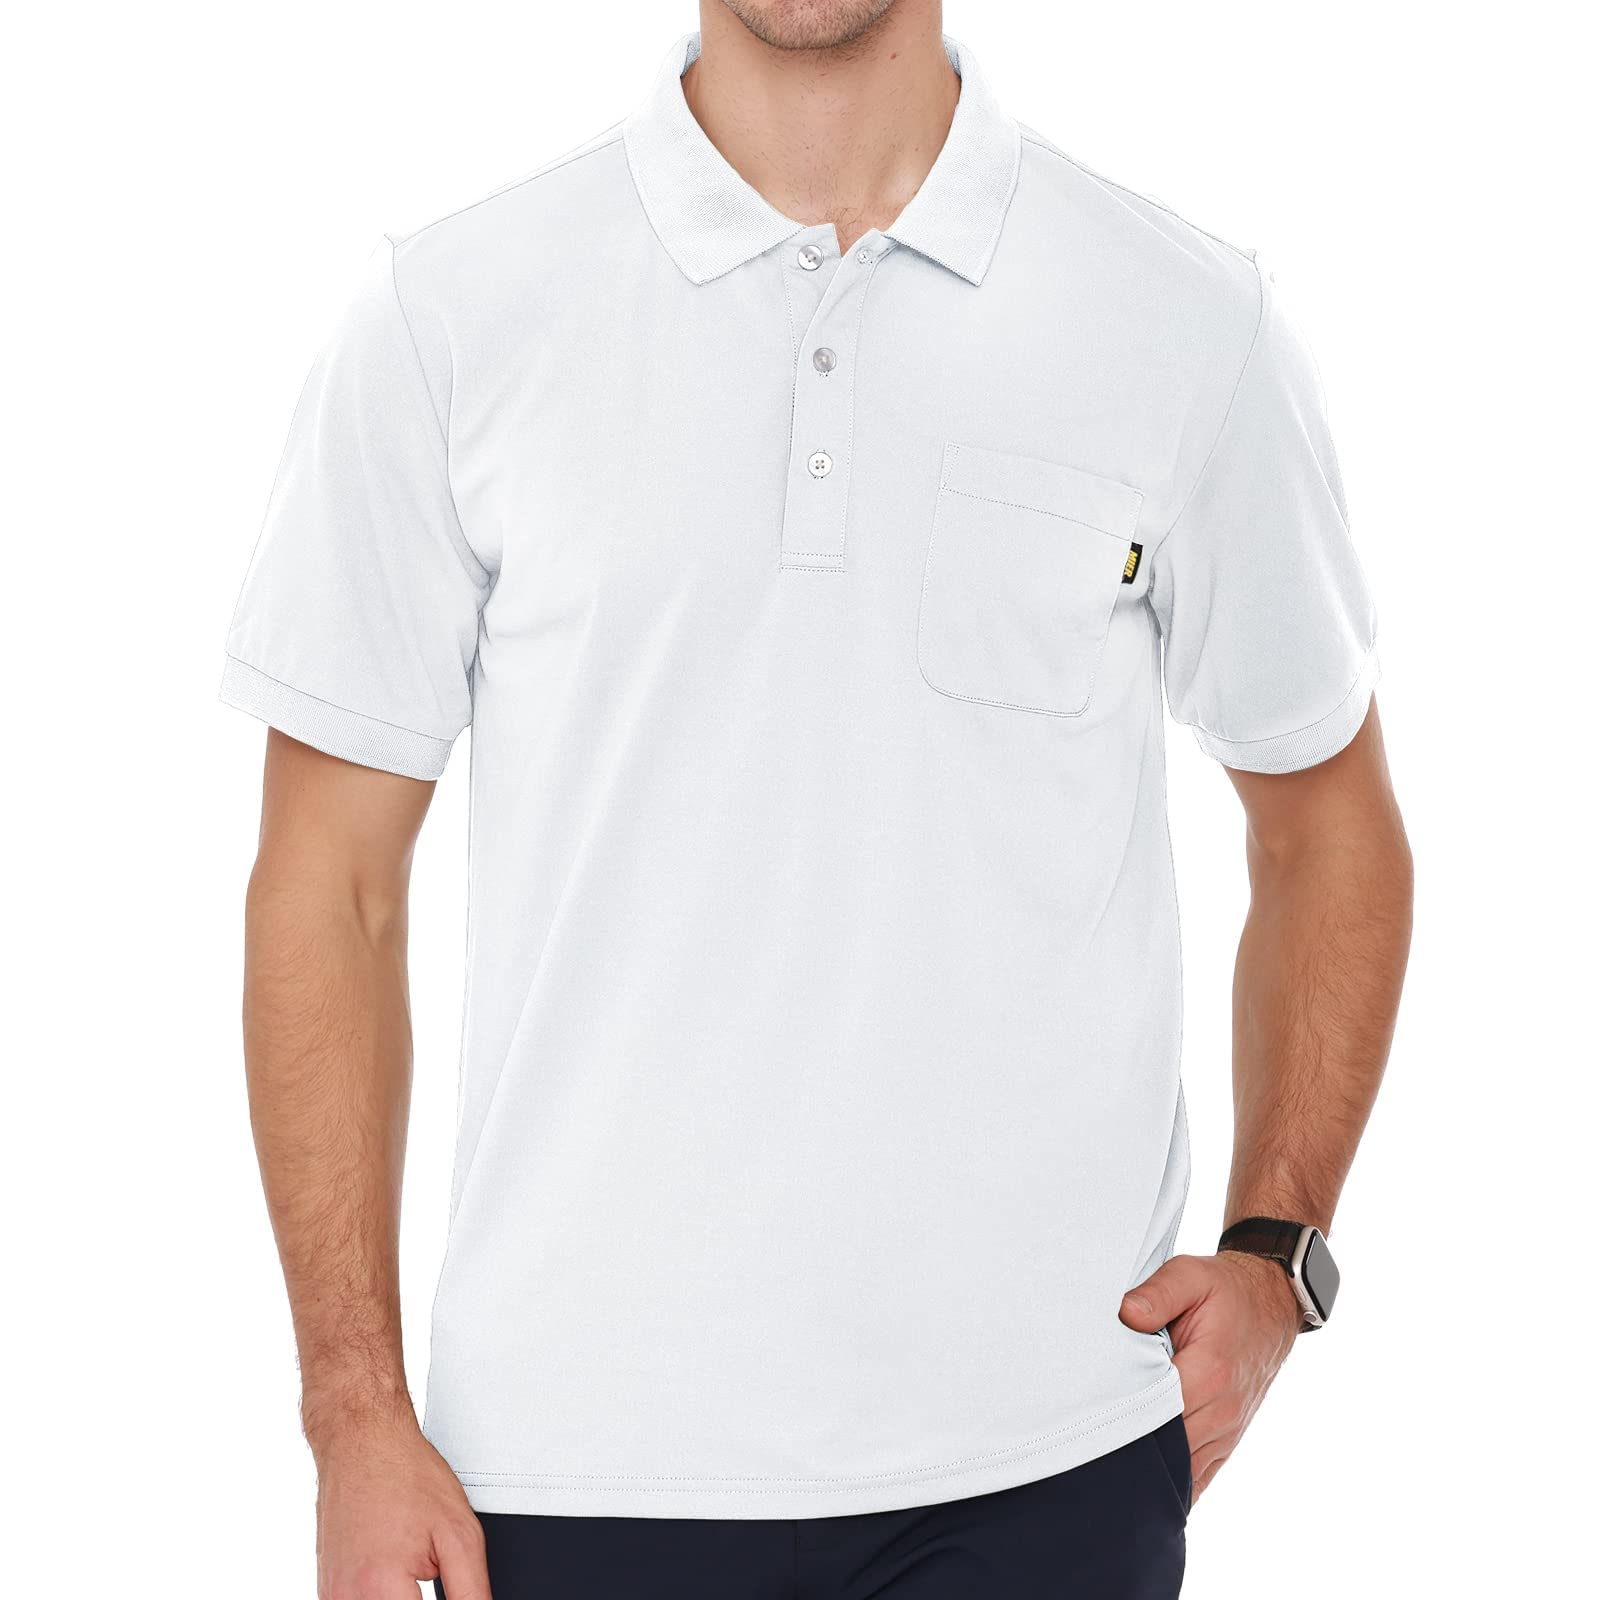 Men Polo Shirts with Pocket Dry Fit Collared Golf T-shirts Men Polo White / S MIER